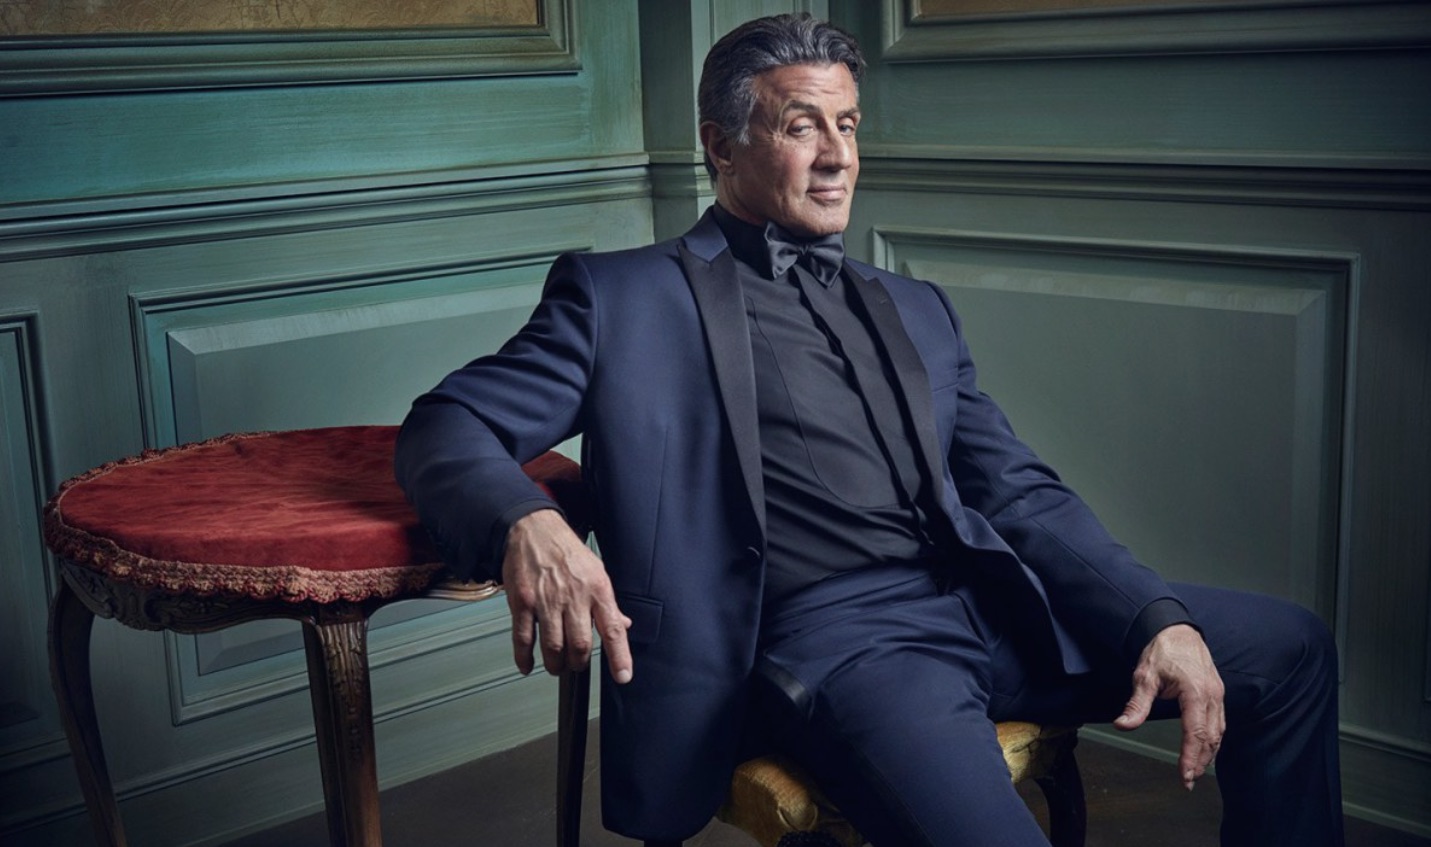 "I put my trust in Jesus" - Sylvester Stallone speaks up 